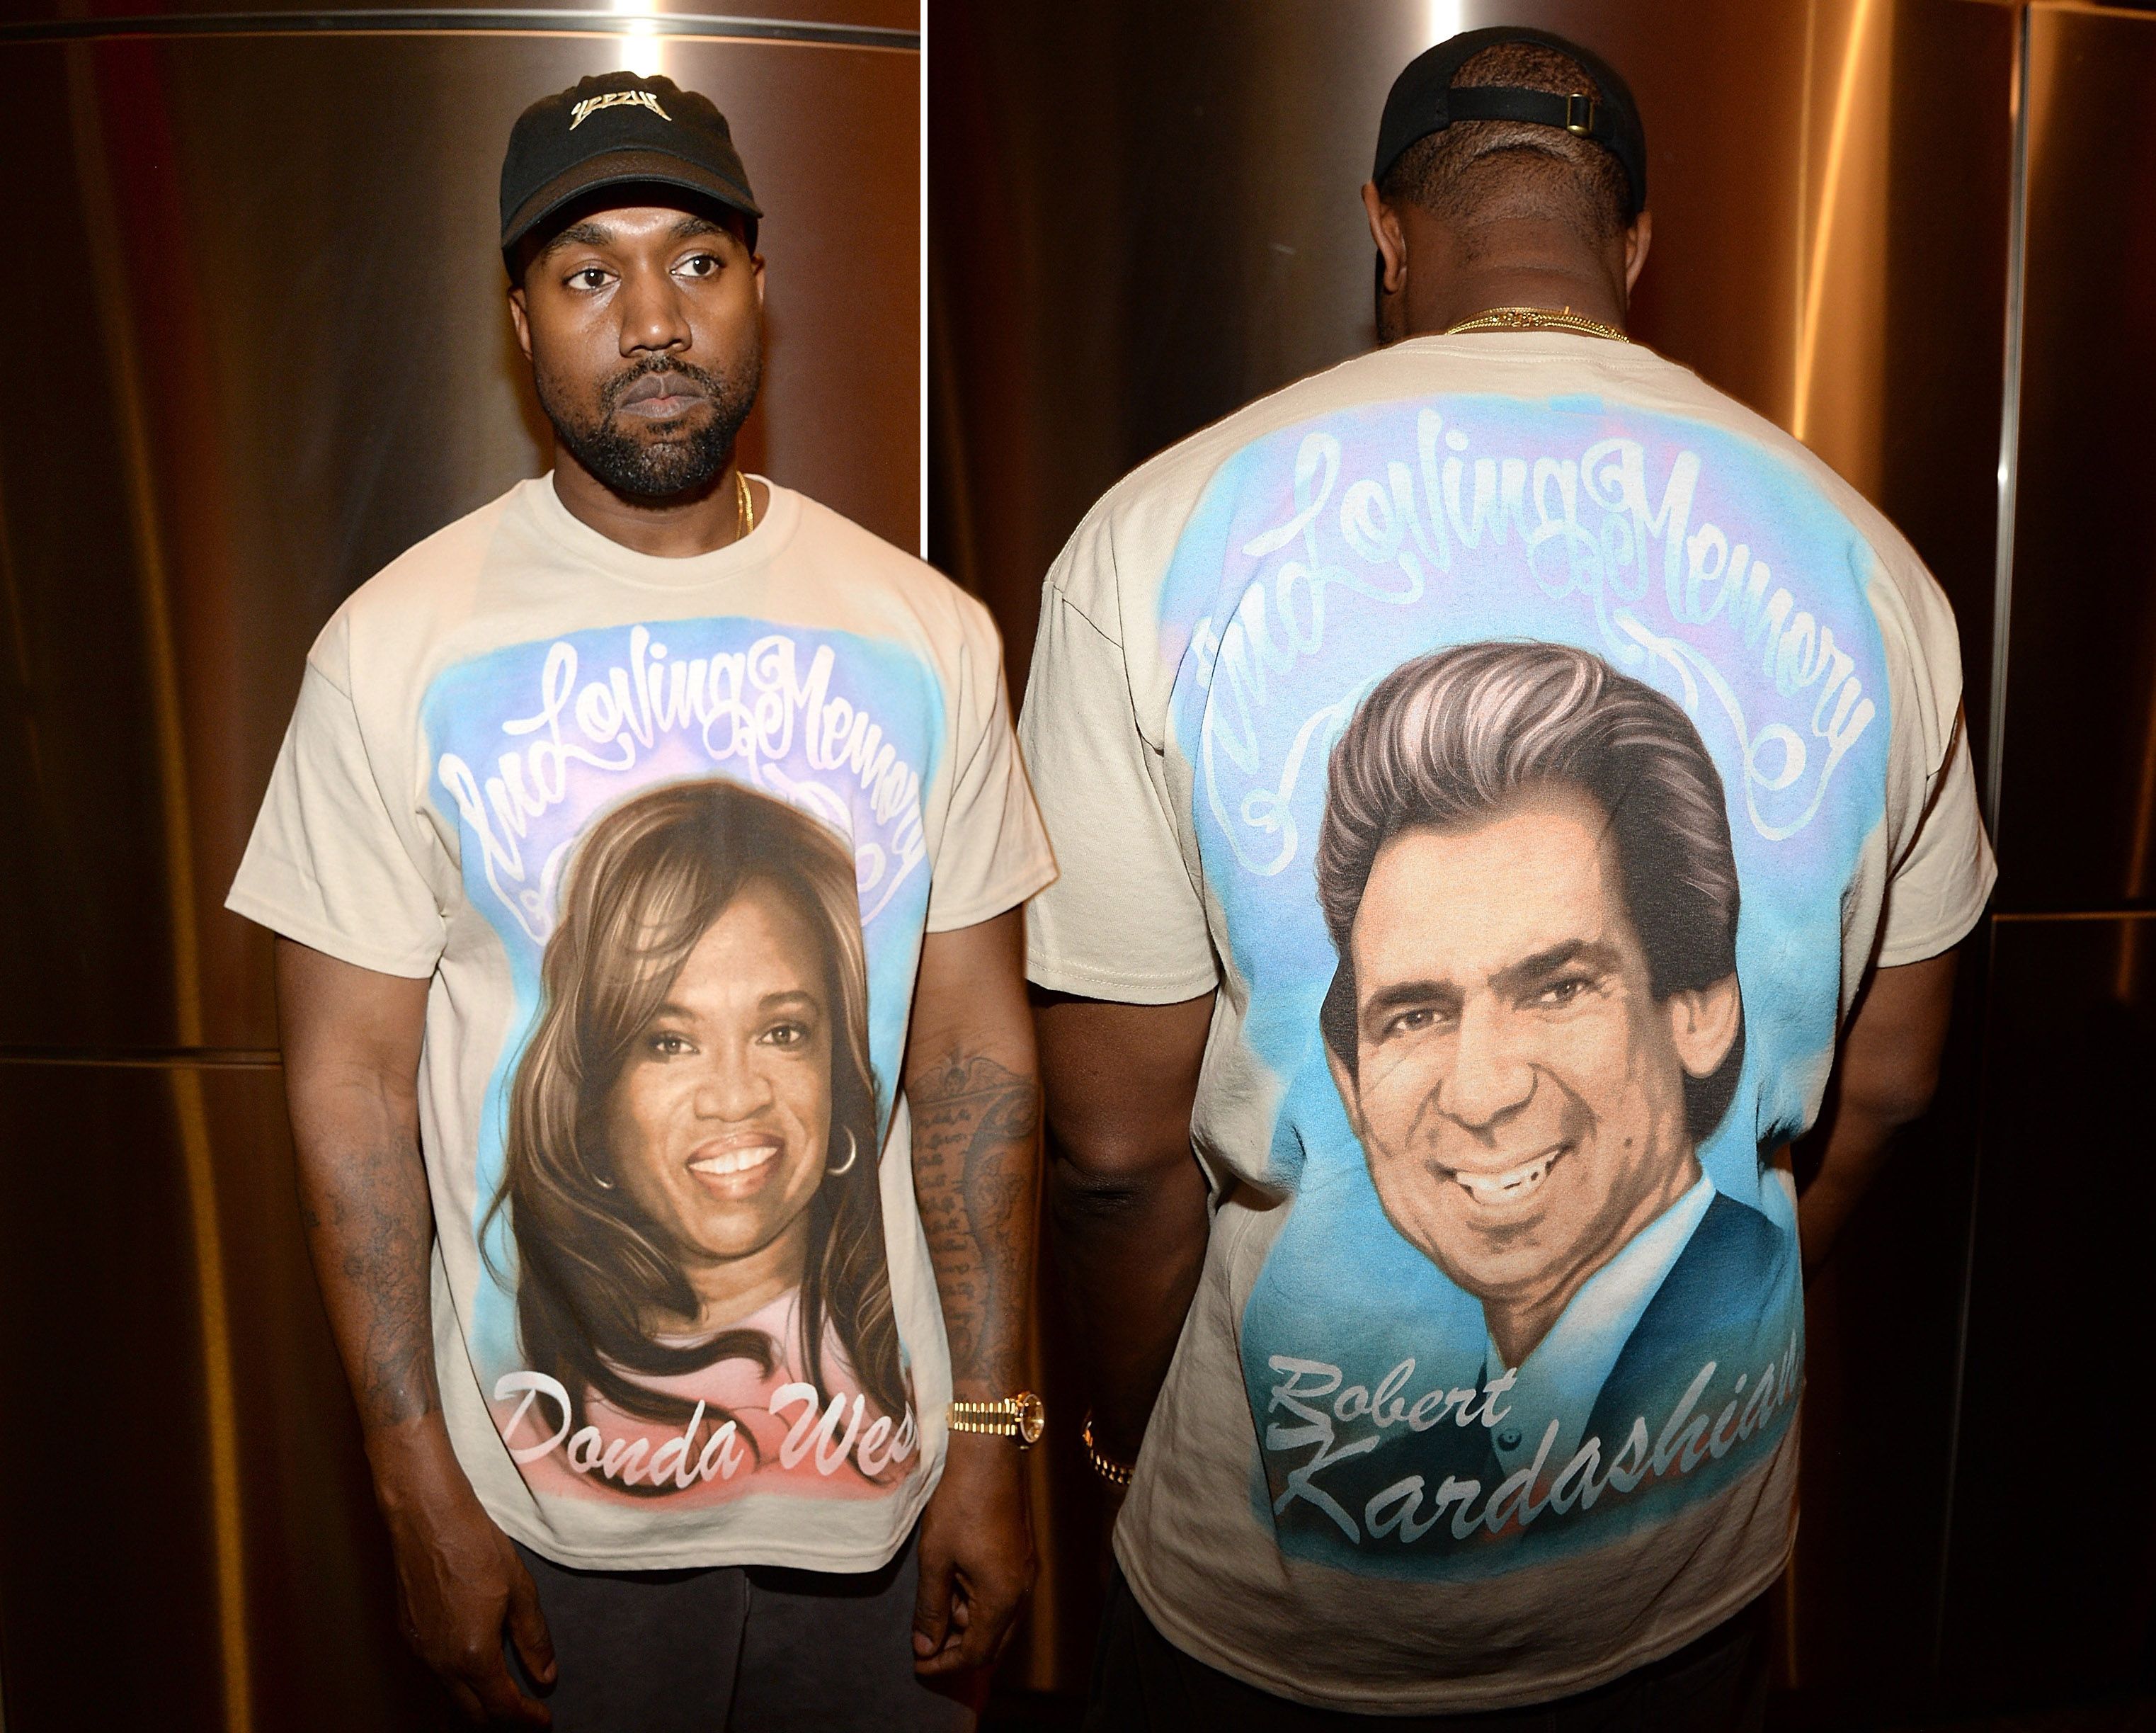 At His Yeezy 3 Show, Kanye Sold Airbrush Featuring His Robert Kardashian's Portraits